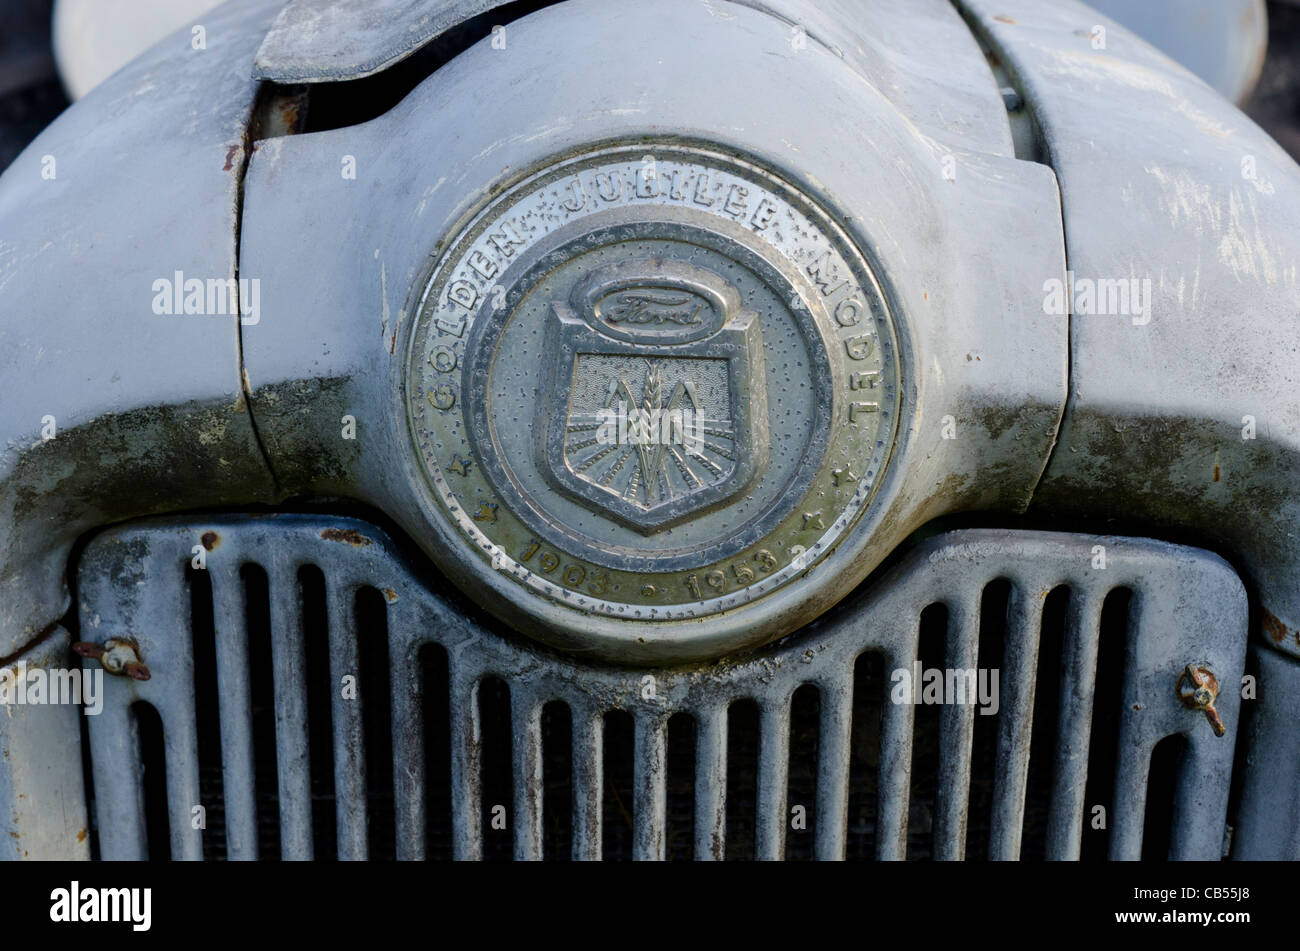 Antique Ford tractor emblem Stock Photo